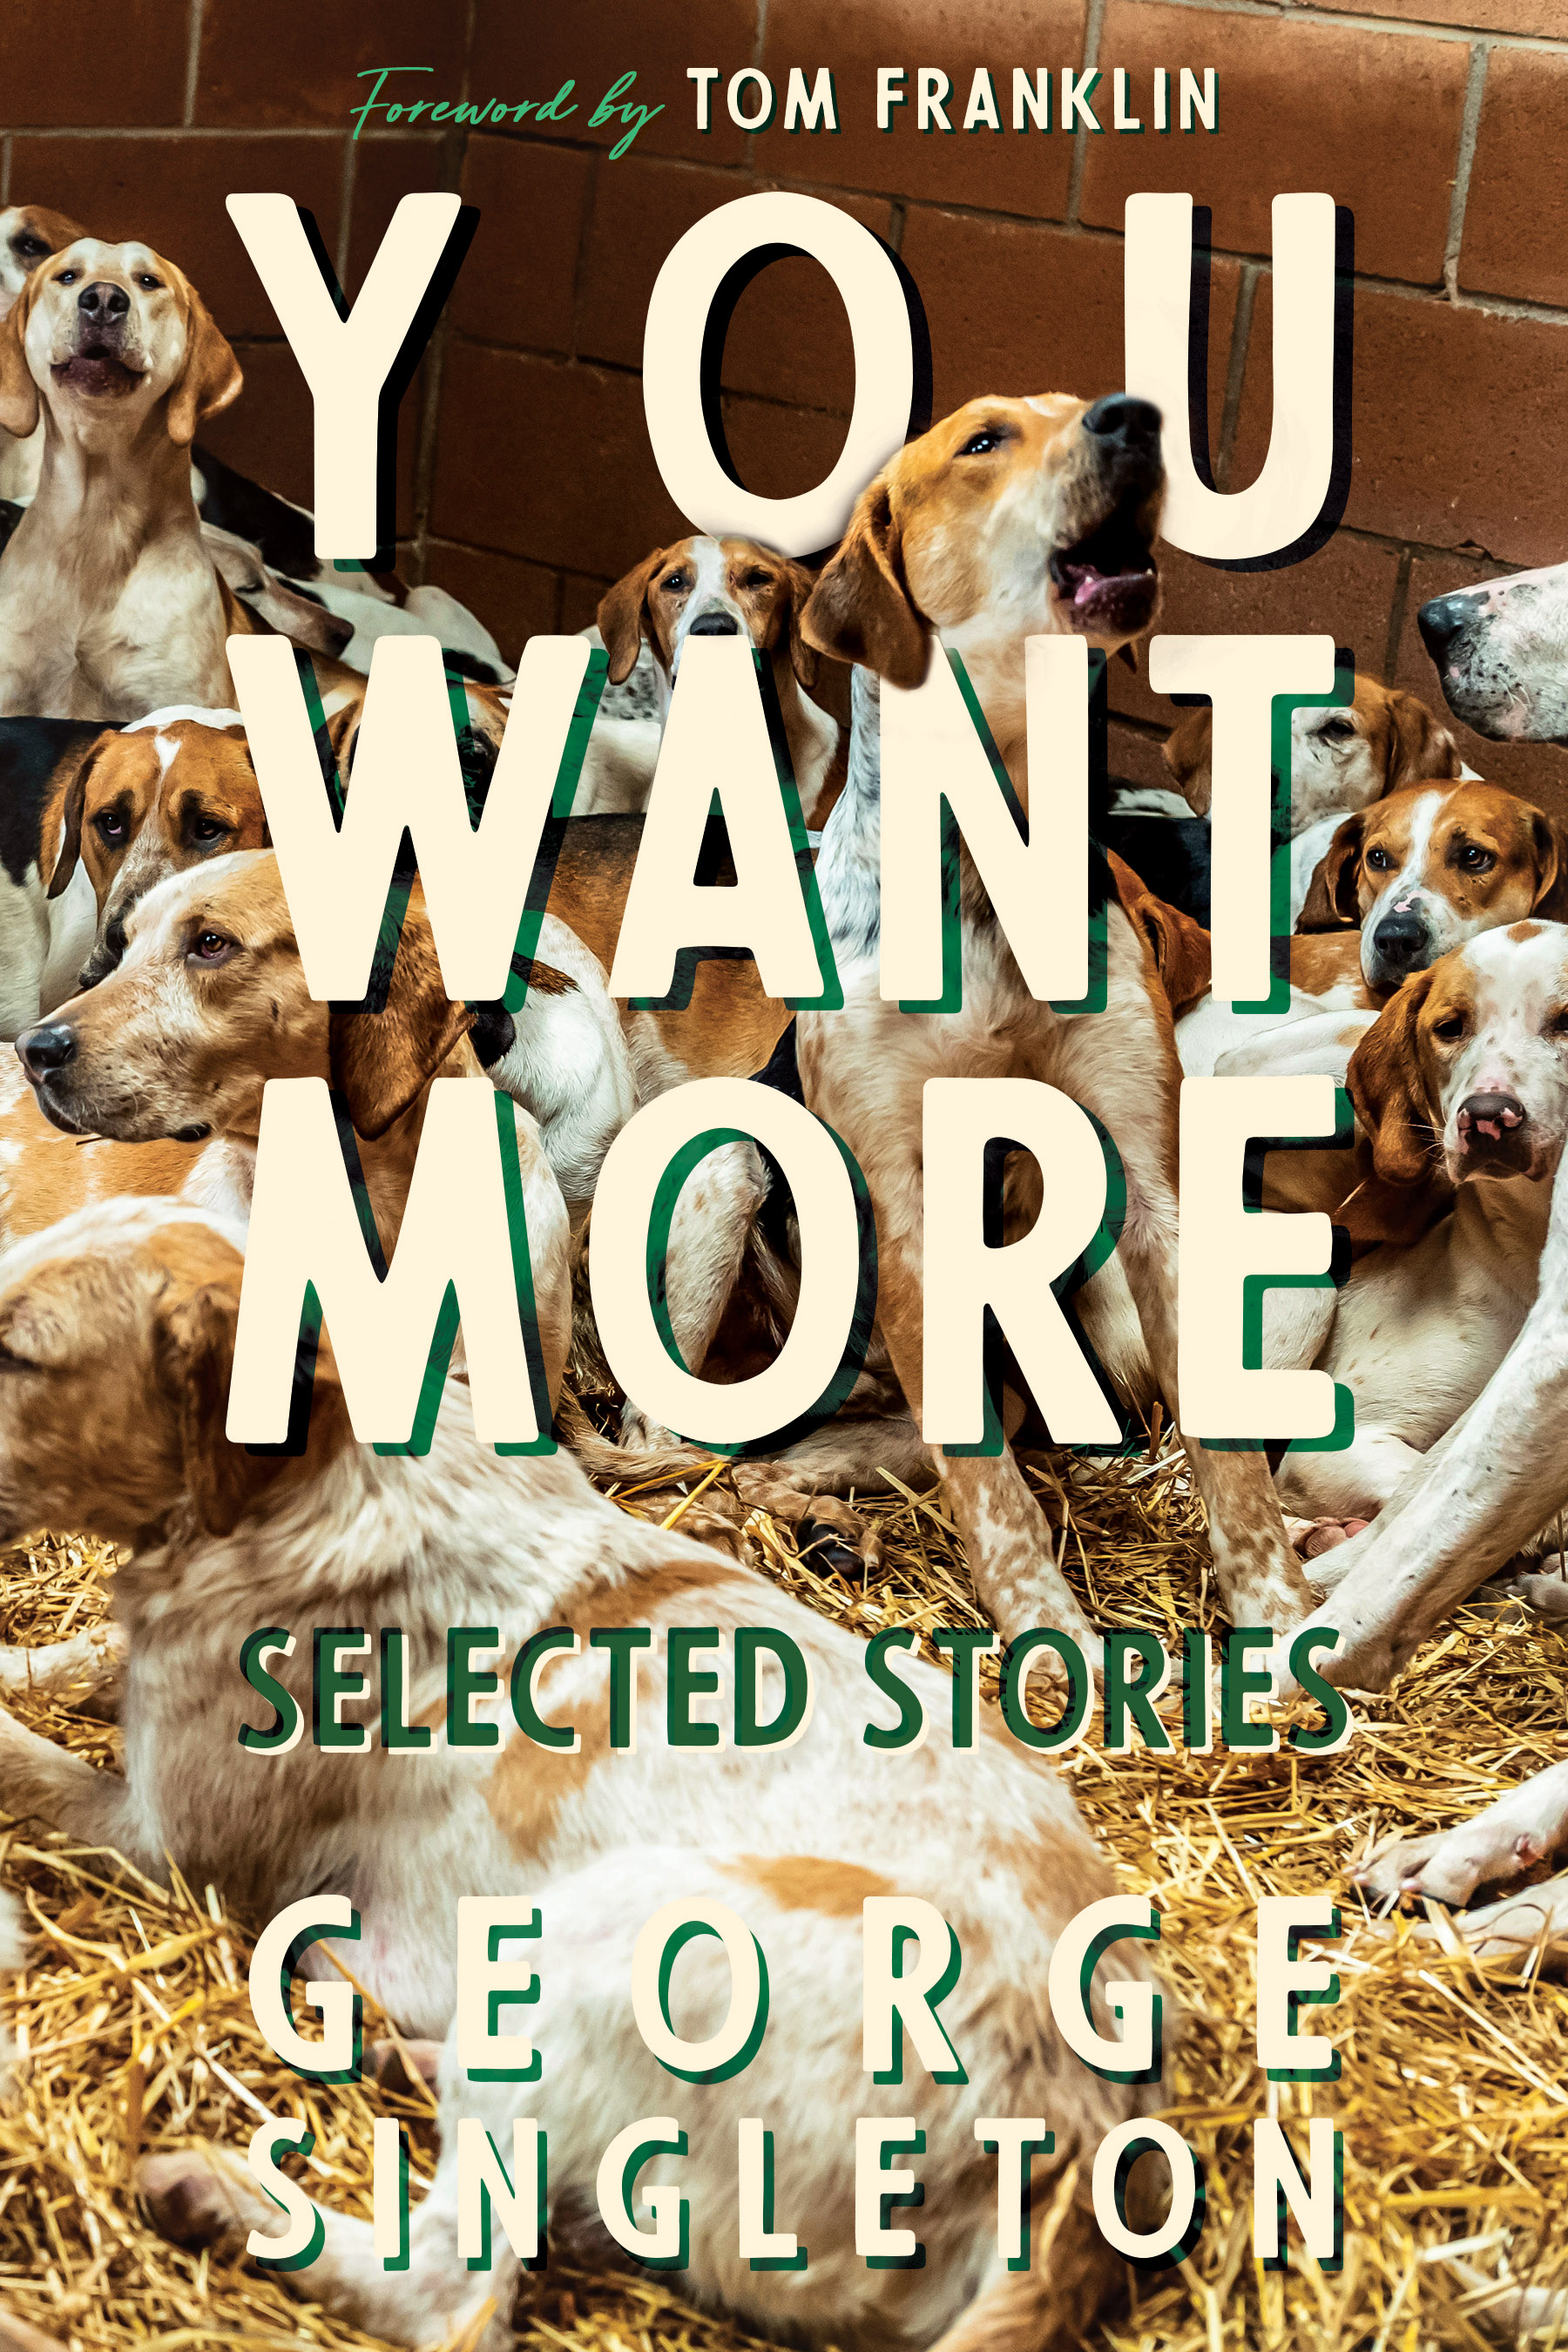 You Want More: Selected Stories of George Singleton